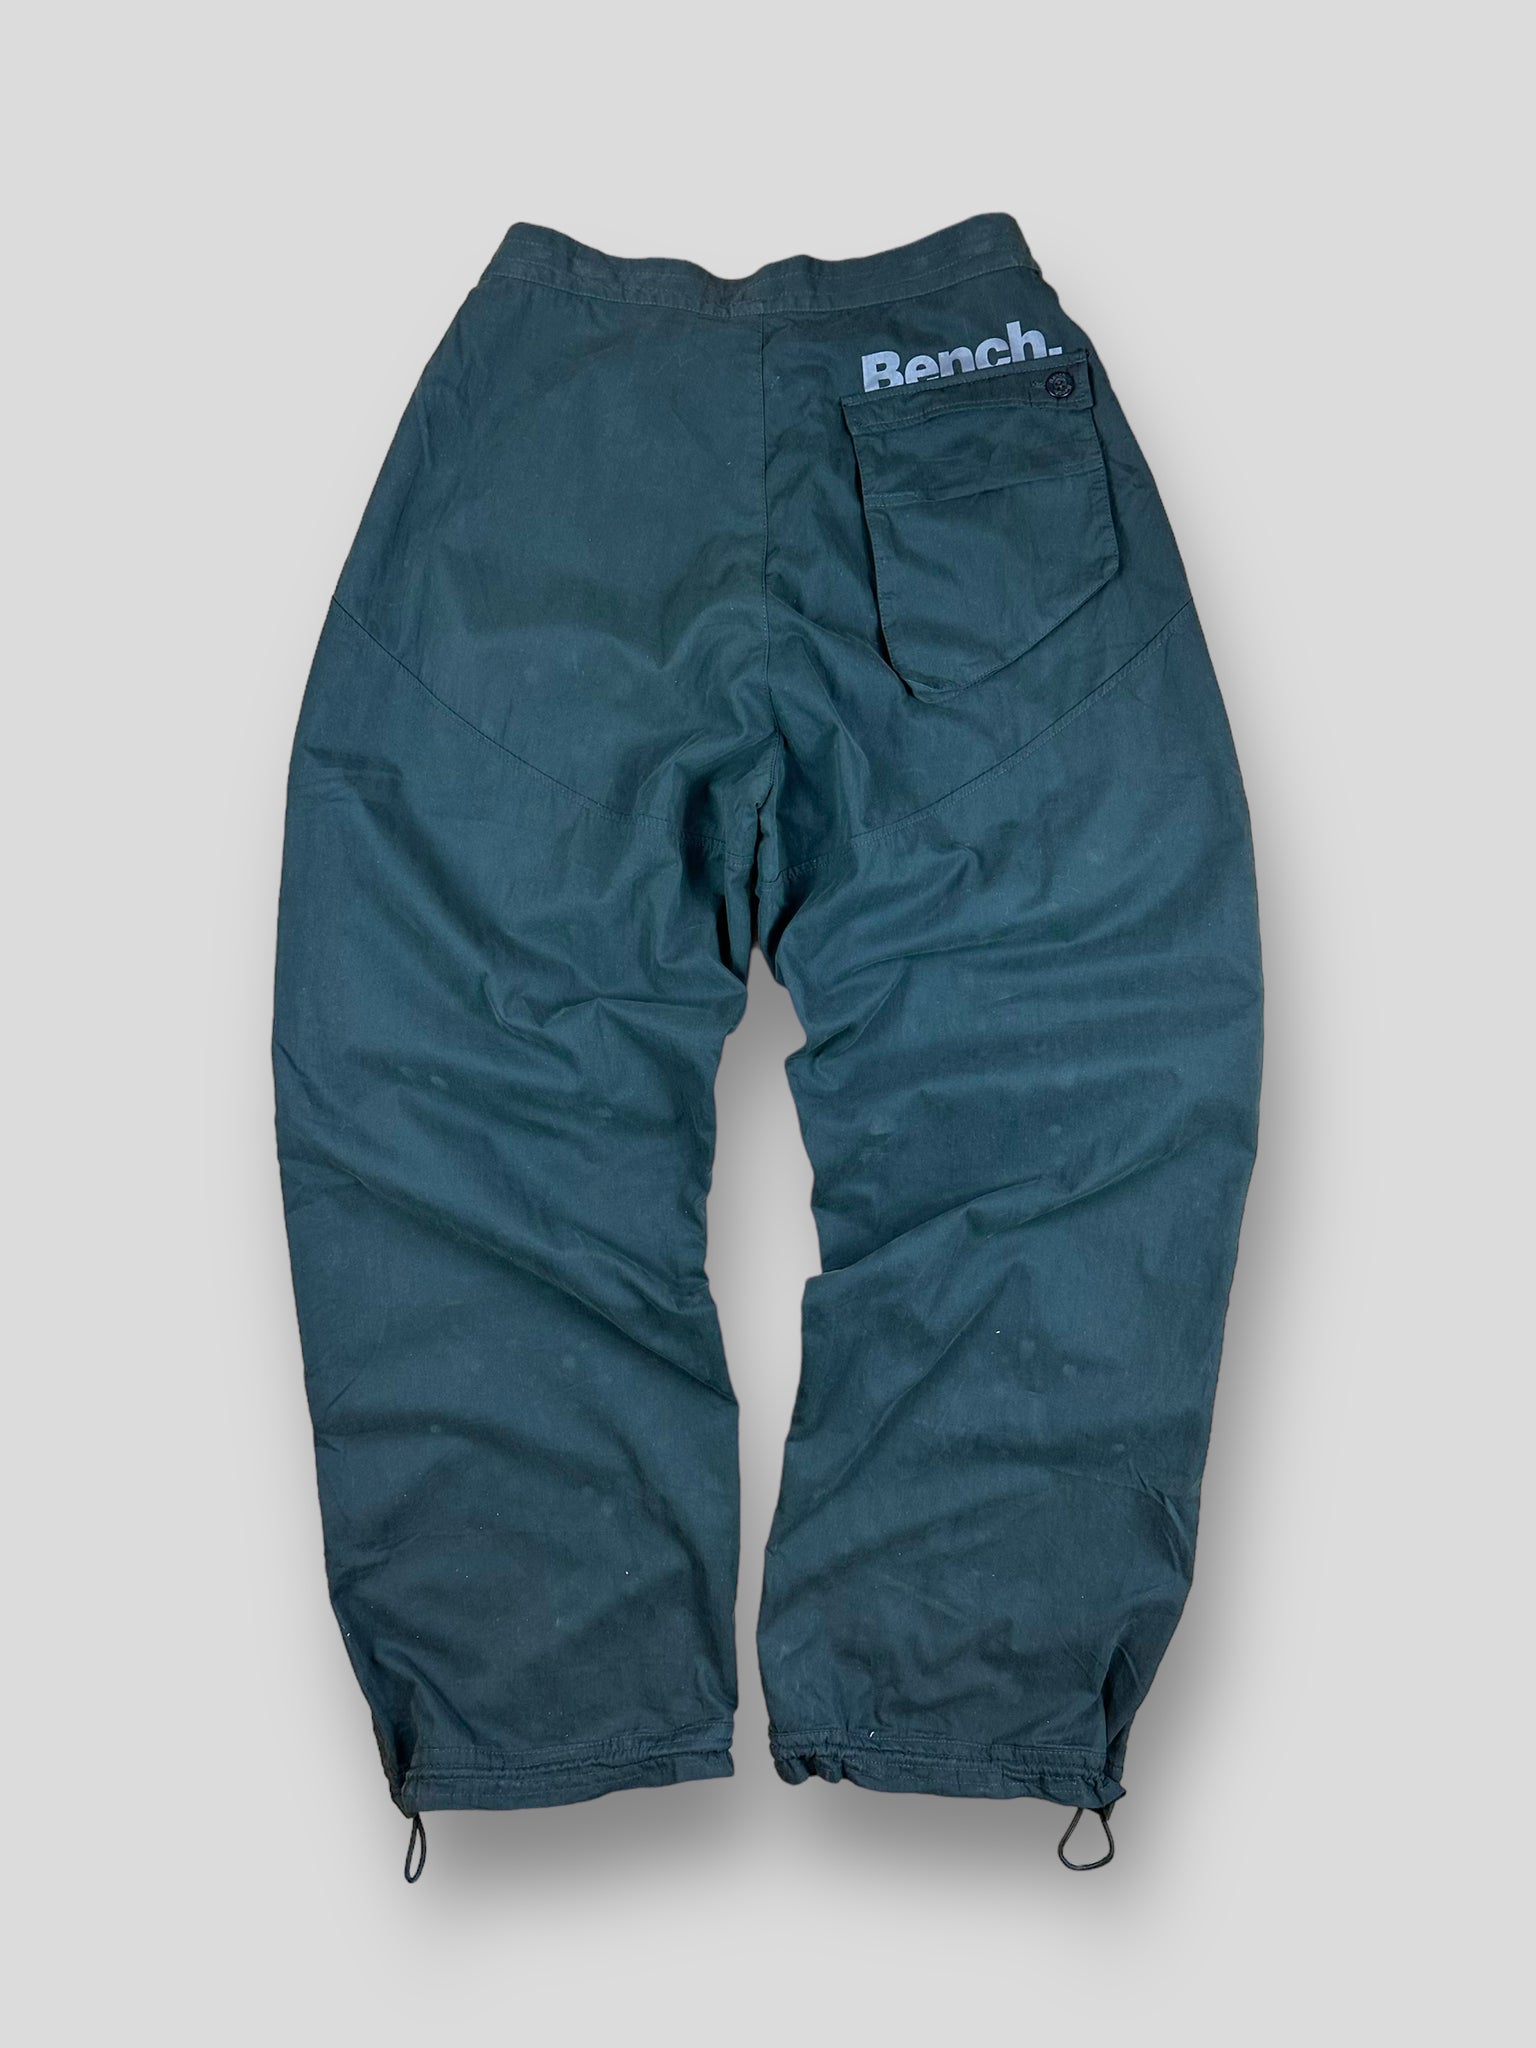 Bench 90s trousers